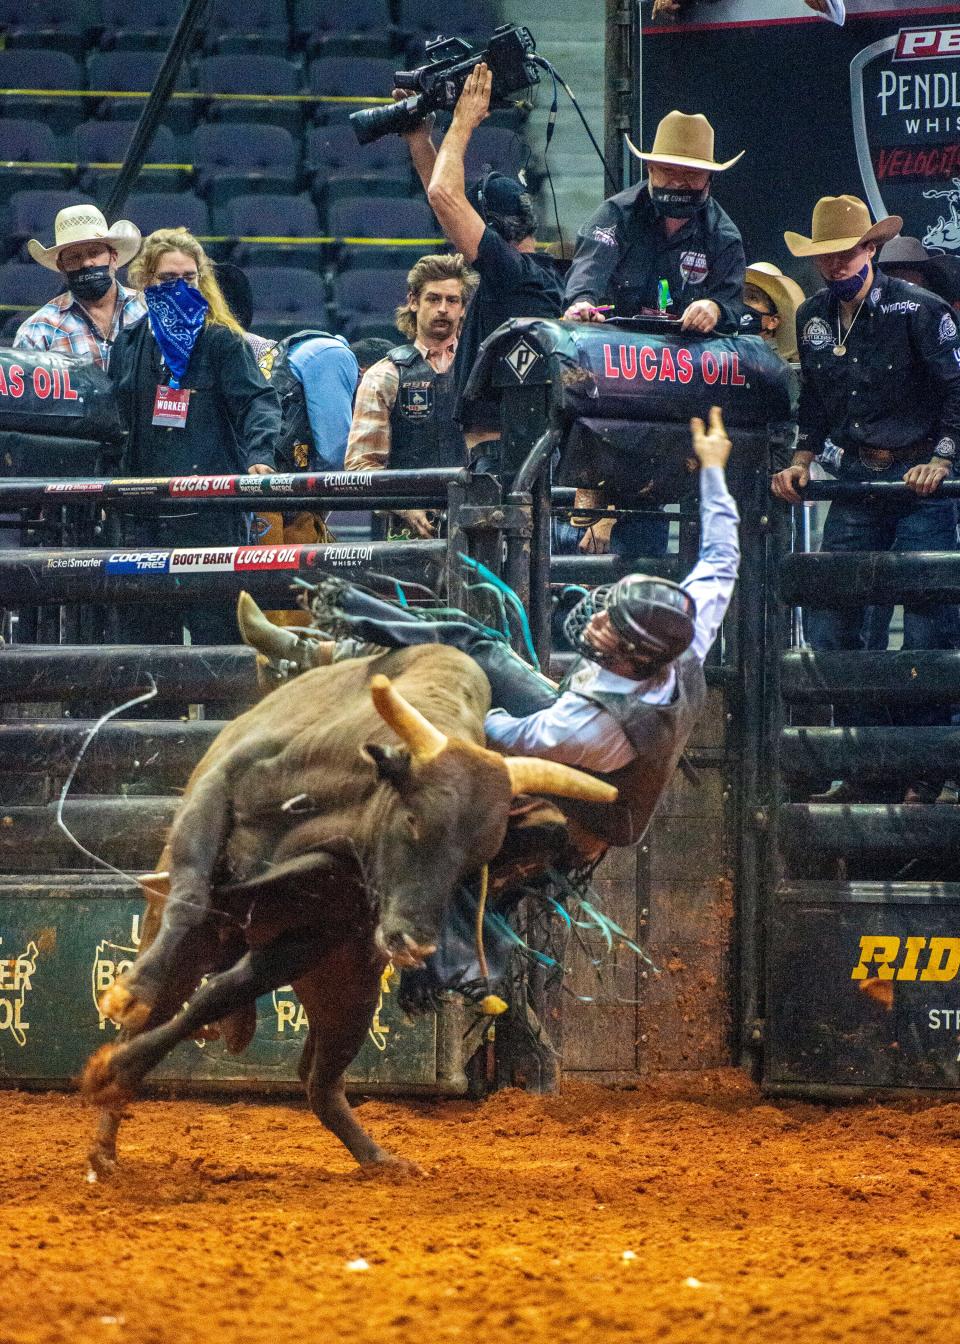 Conner Halverson competes during the Professional Bull Riders Pendleton Whisky Velocity Tour Sunday, March 21, 2021 at the Pensacola Bay Center.